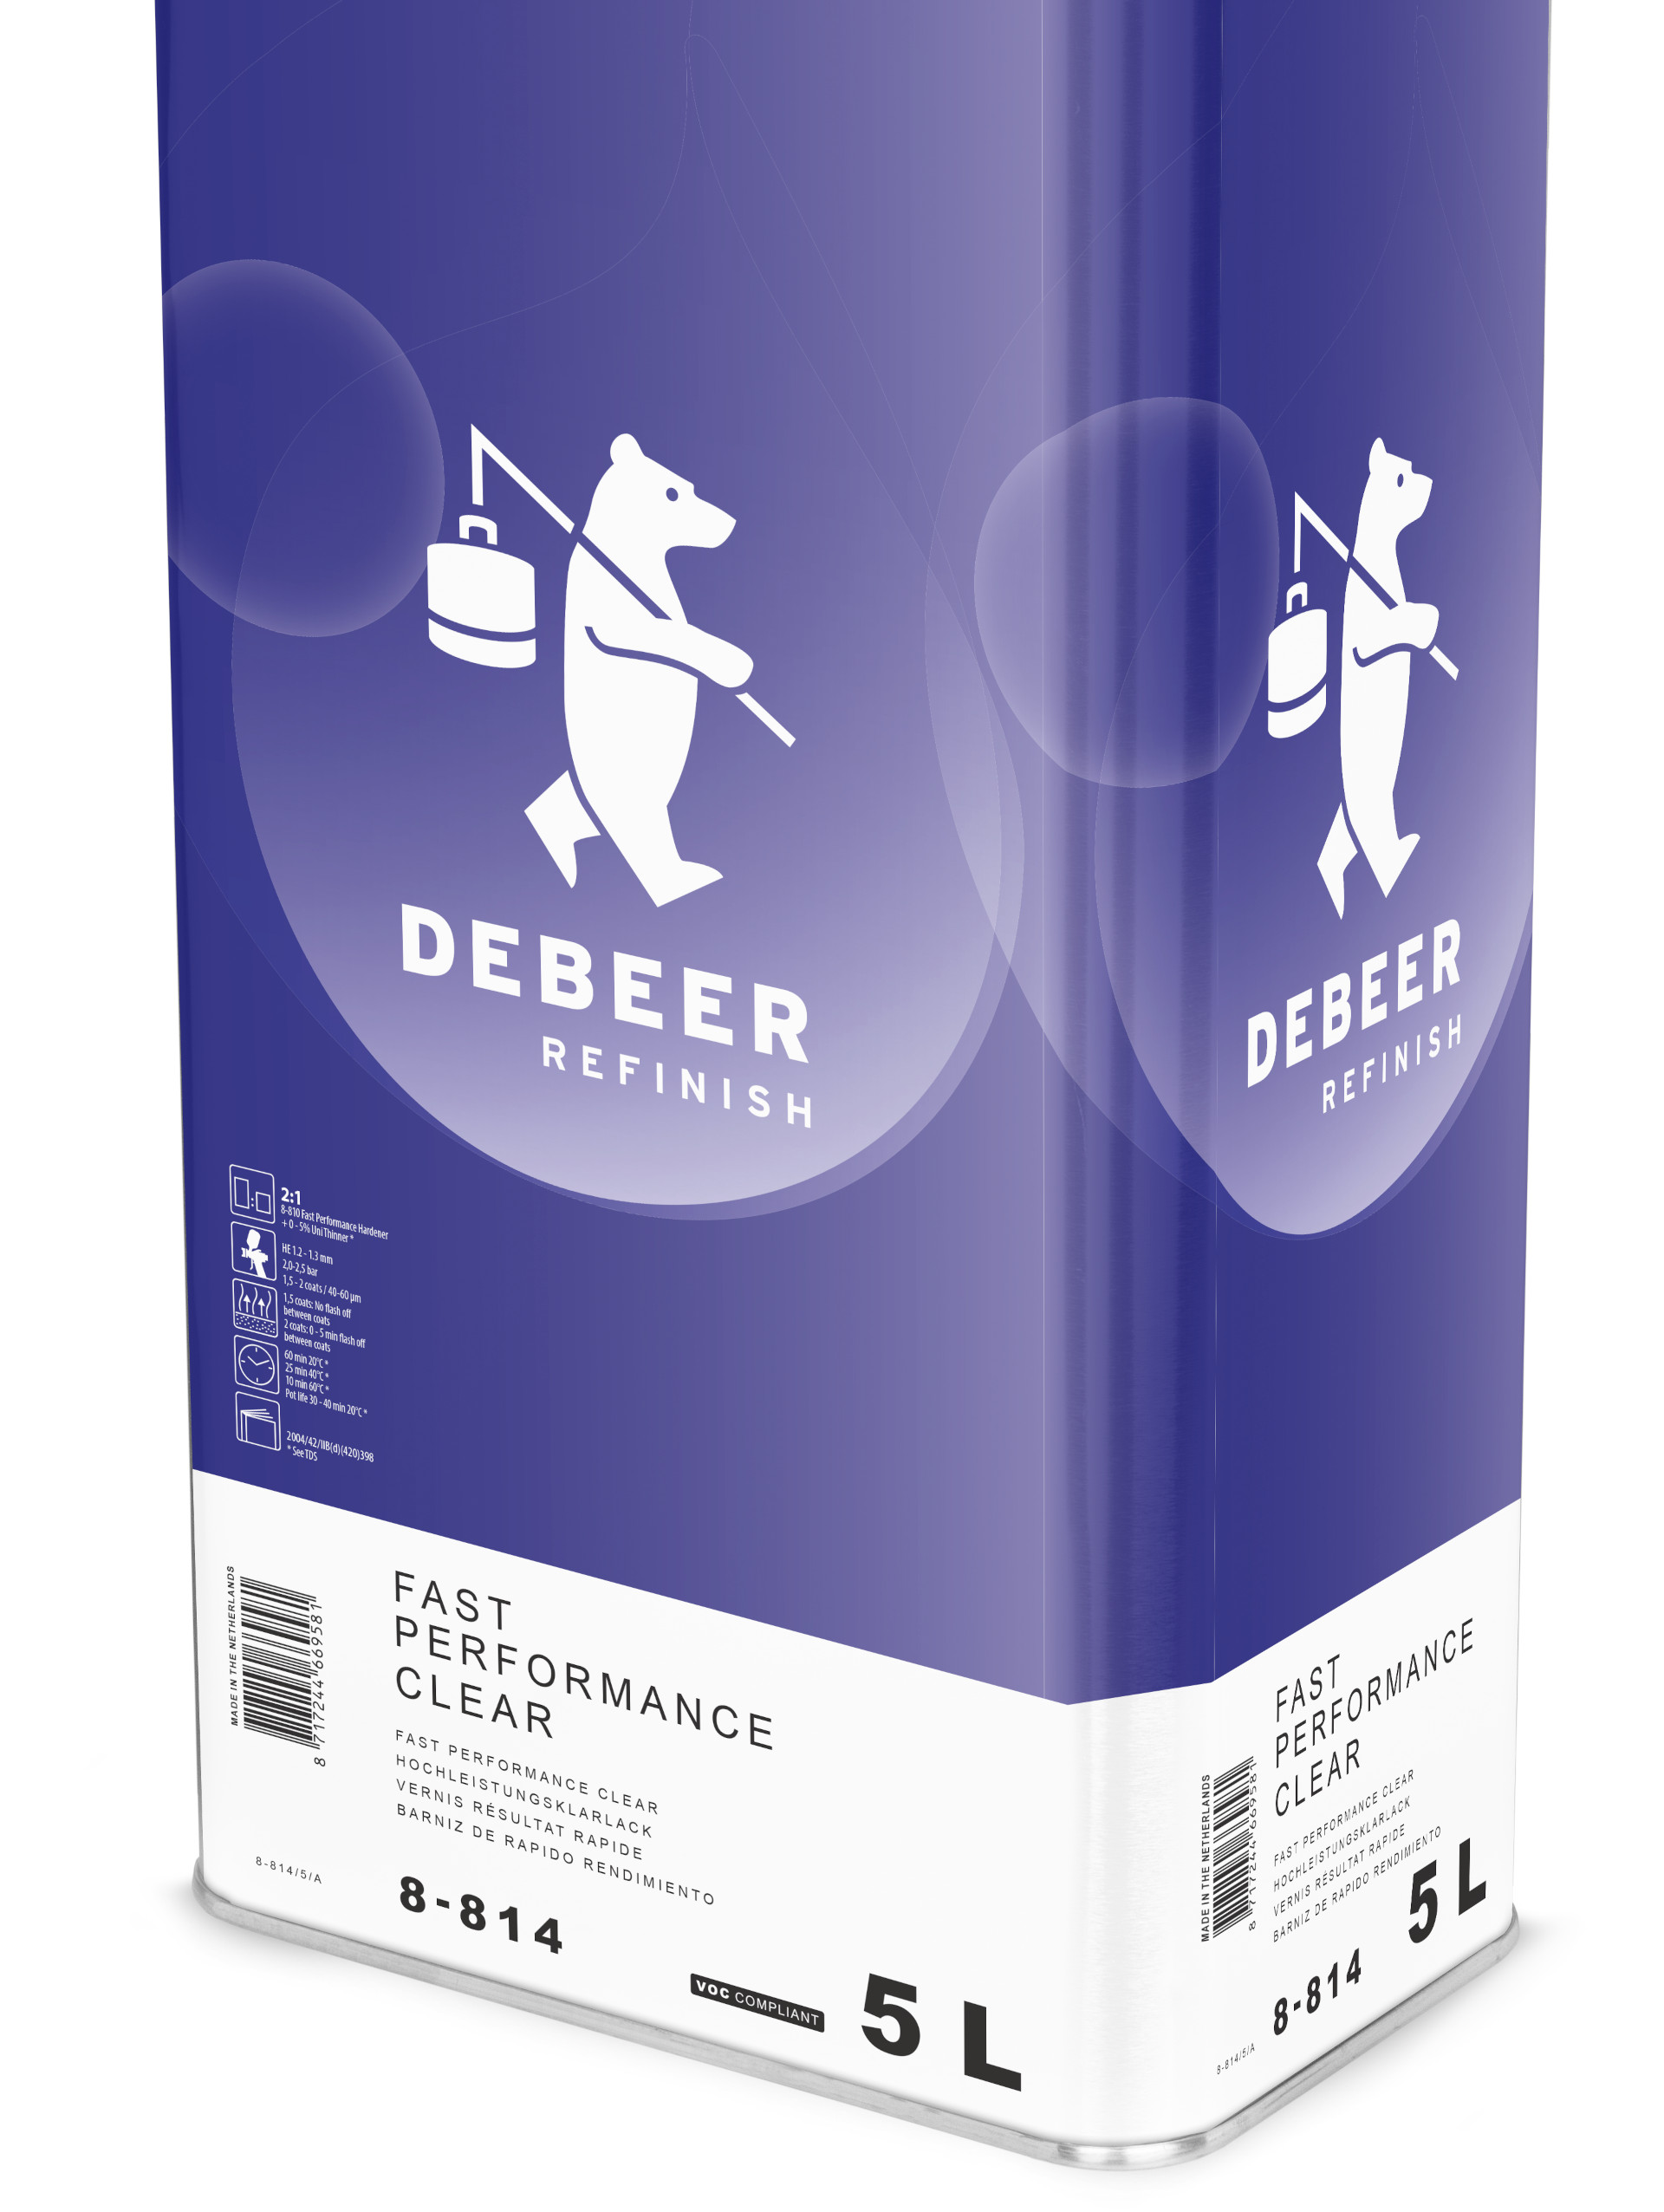 (NEW) DeBeer 8-814 Fast Performance Clear